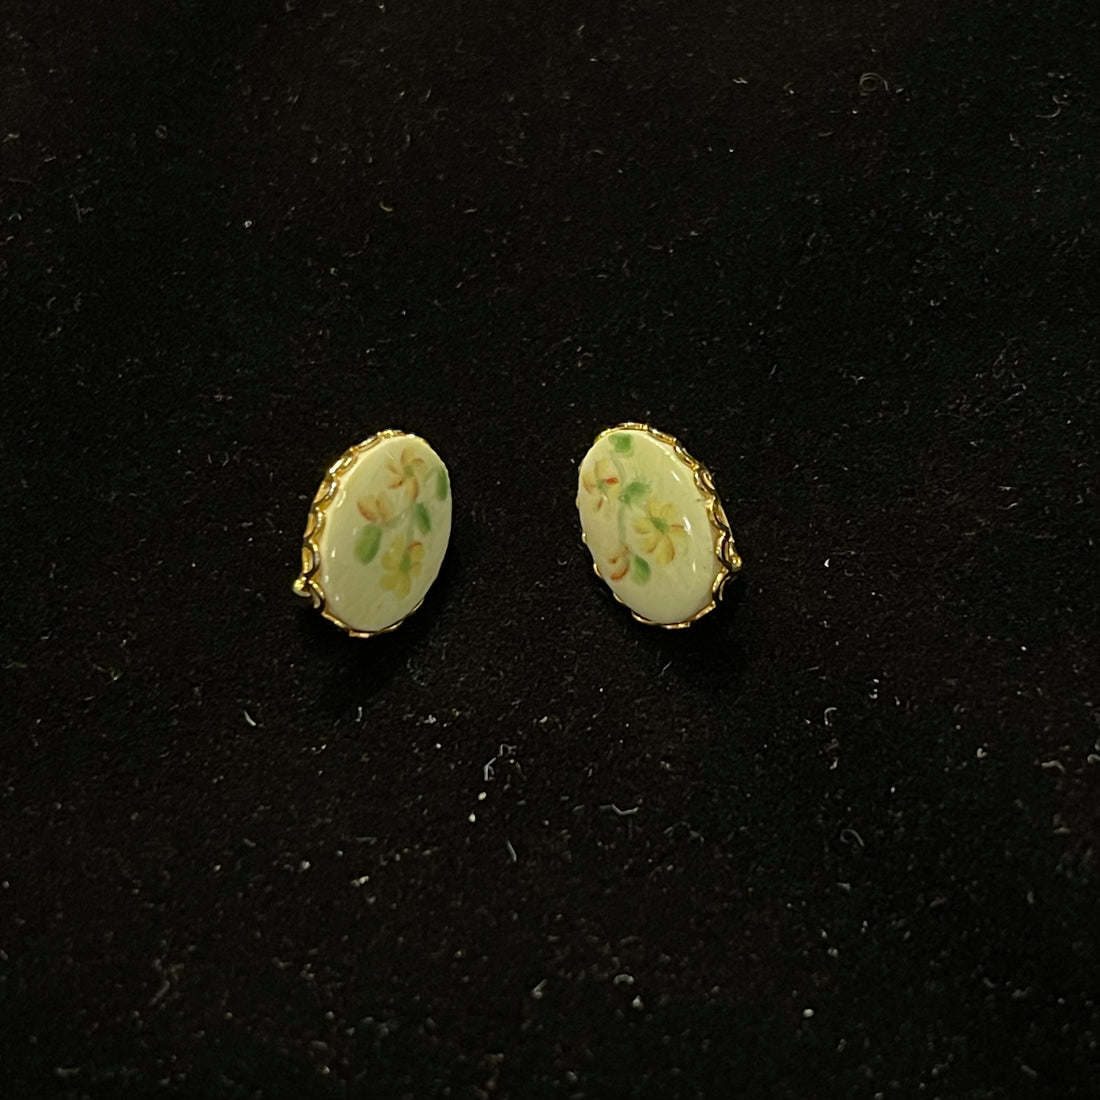 Vintage Oval White and Yellow Floral Porcelain Clip-On Earrings